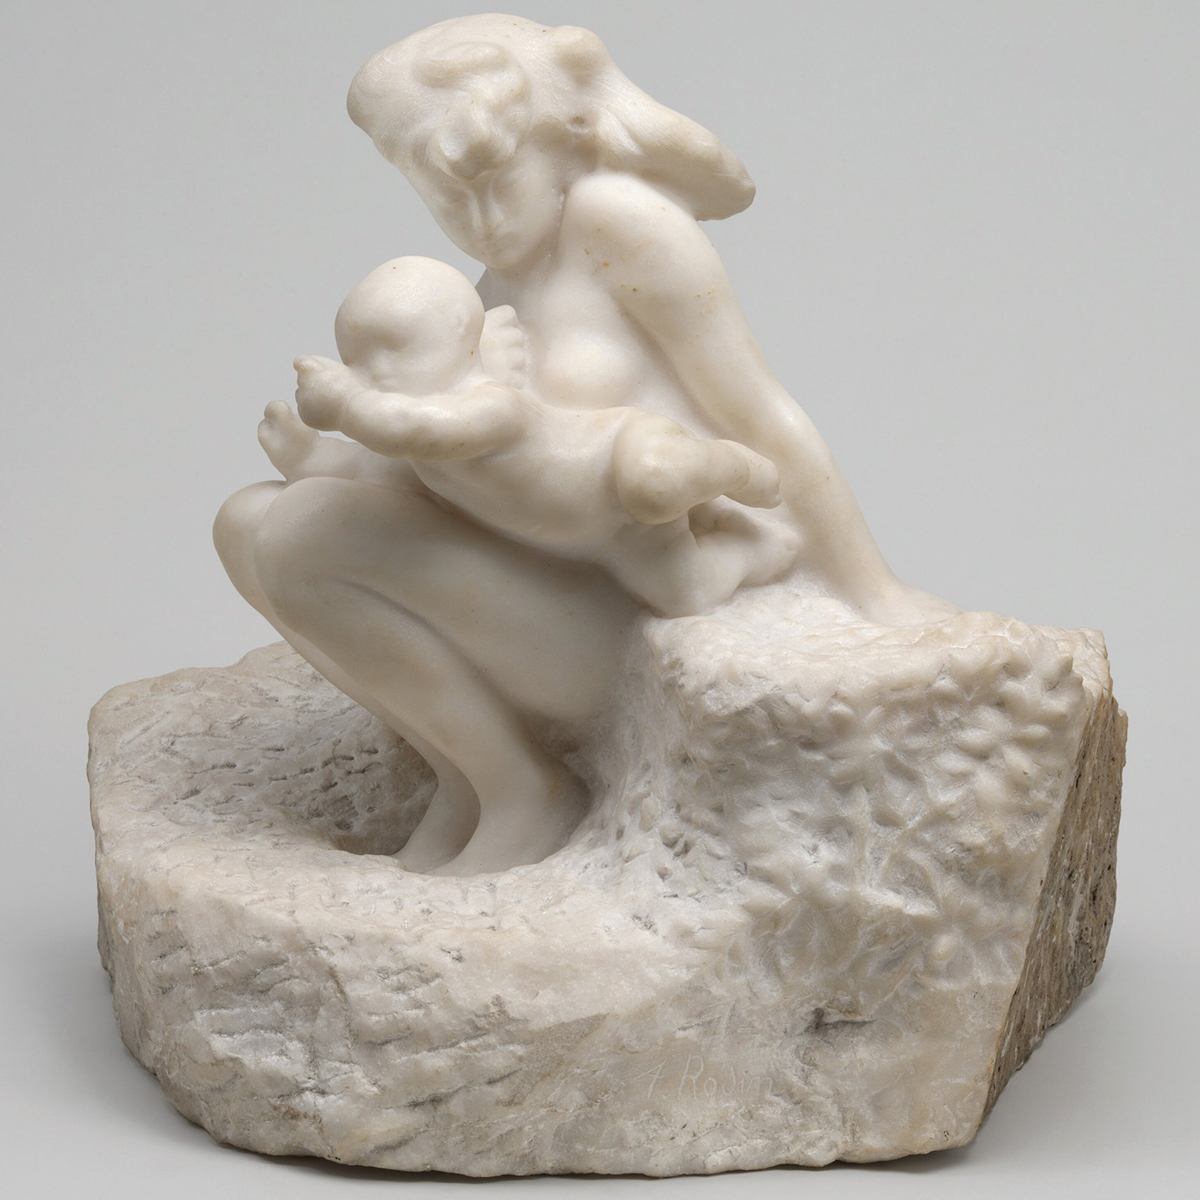 Seated woman holds an infant on her lap, carved in white marble.